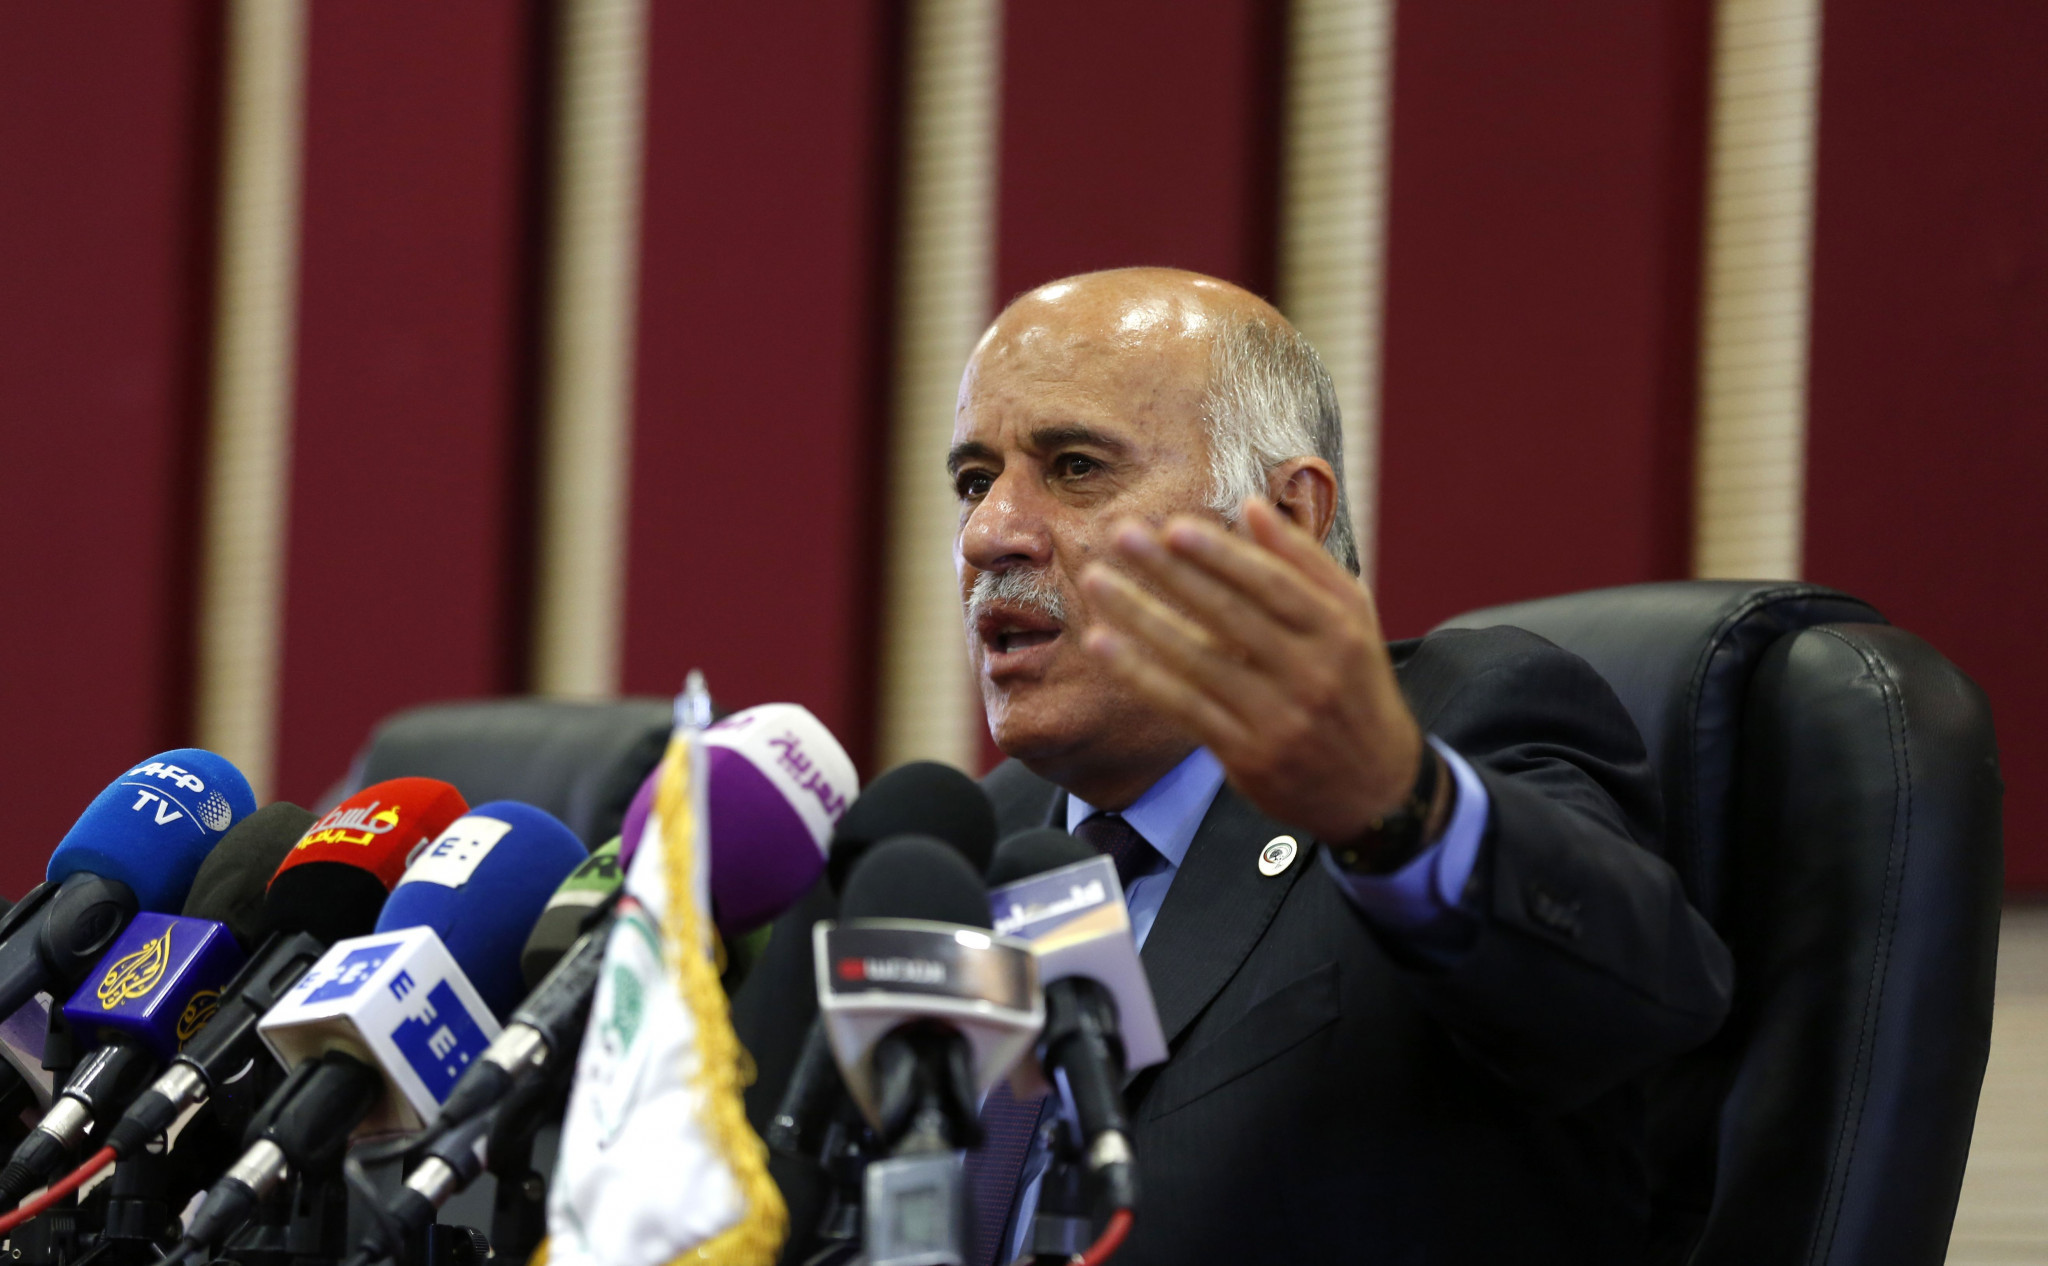 Palestinian Football Association President Jibril Rajoub unsuccessfully attempted to change the FIFA Statutes at is Congress in Moscow last week to punish Israel ©Getty Images